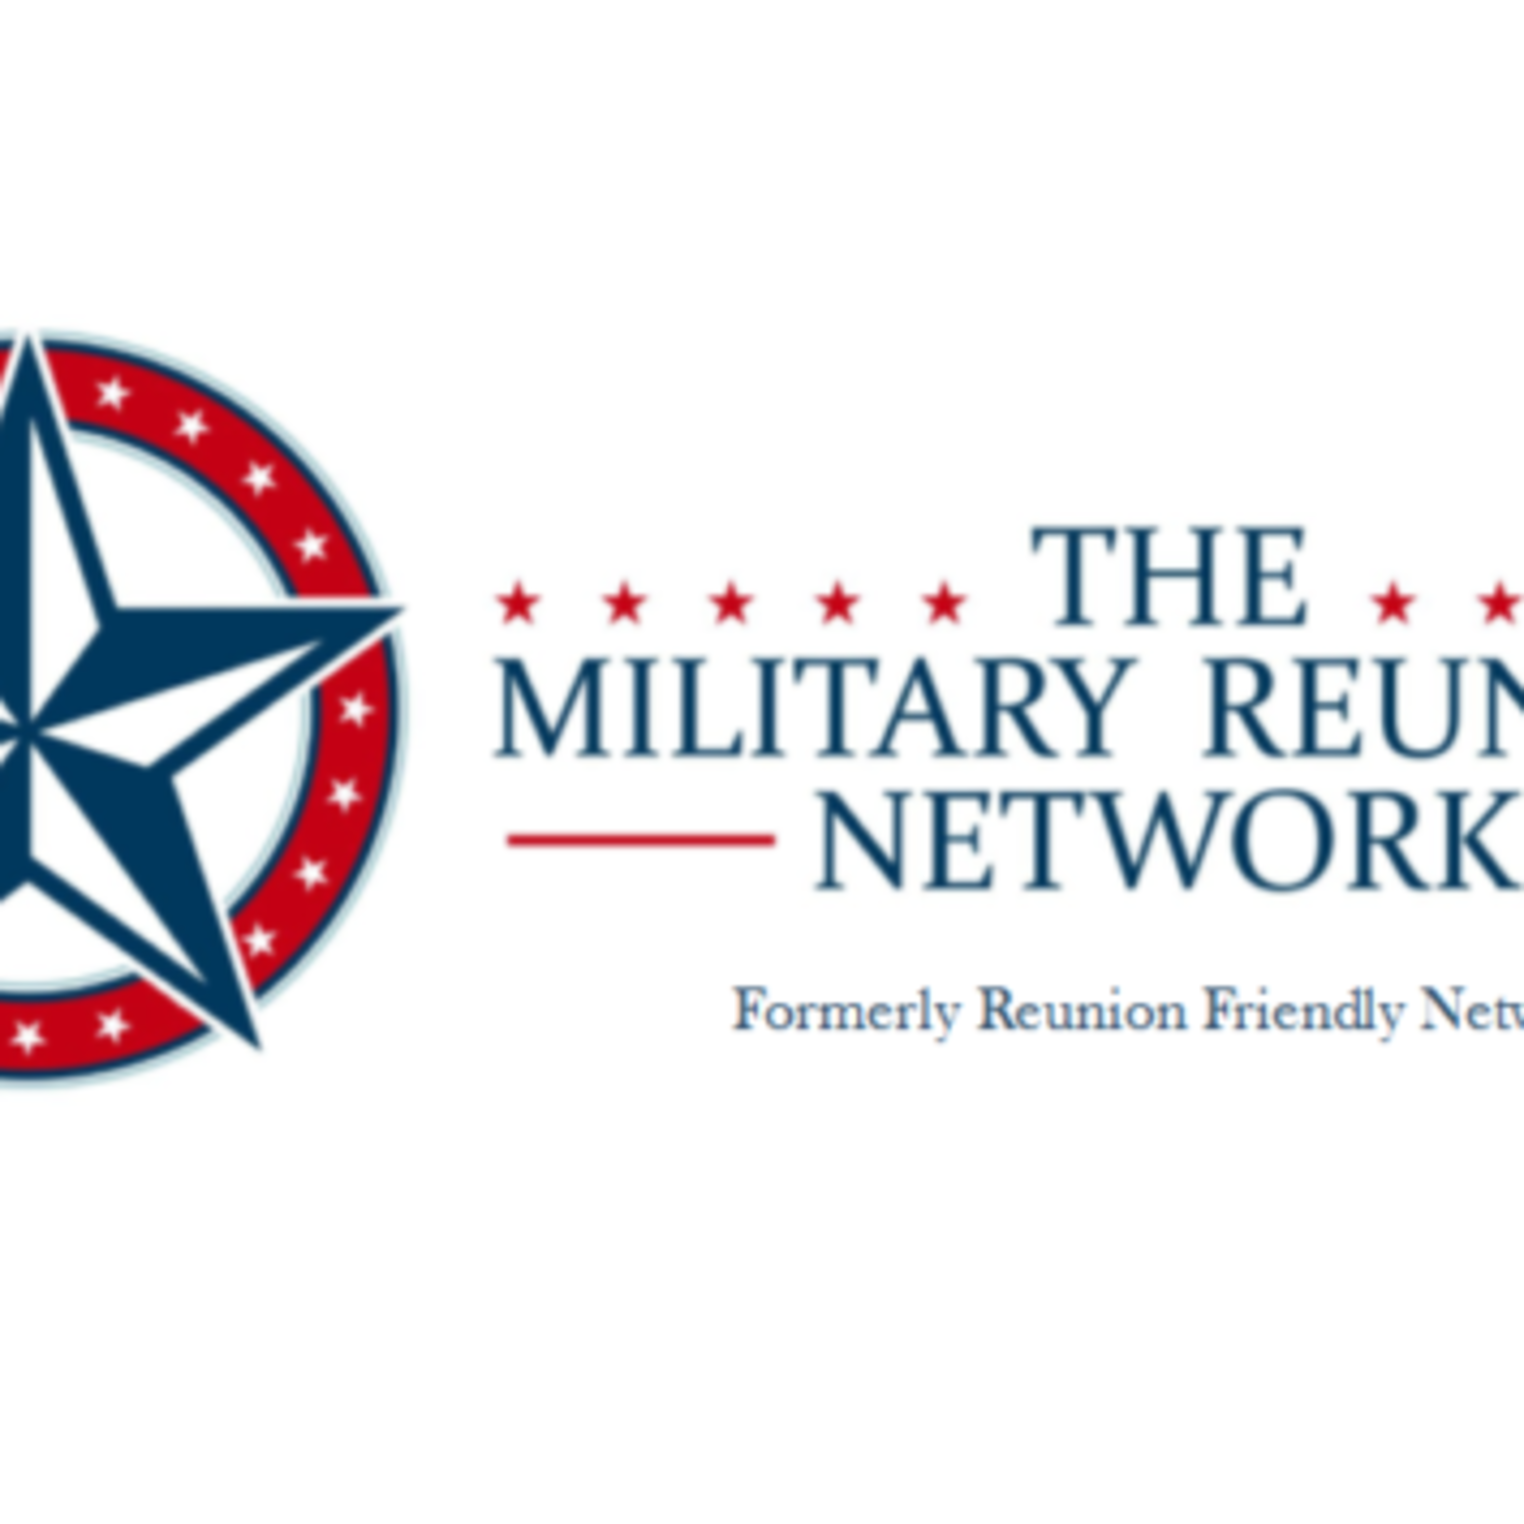 The Military Reunion Network